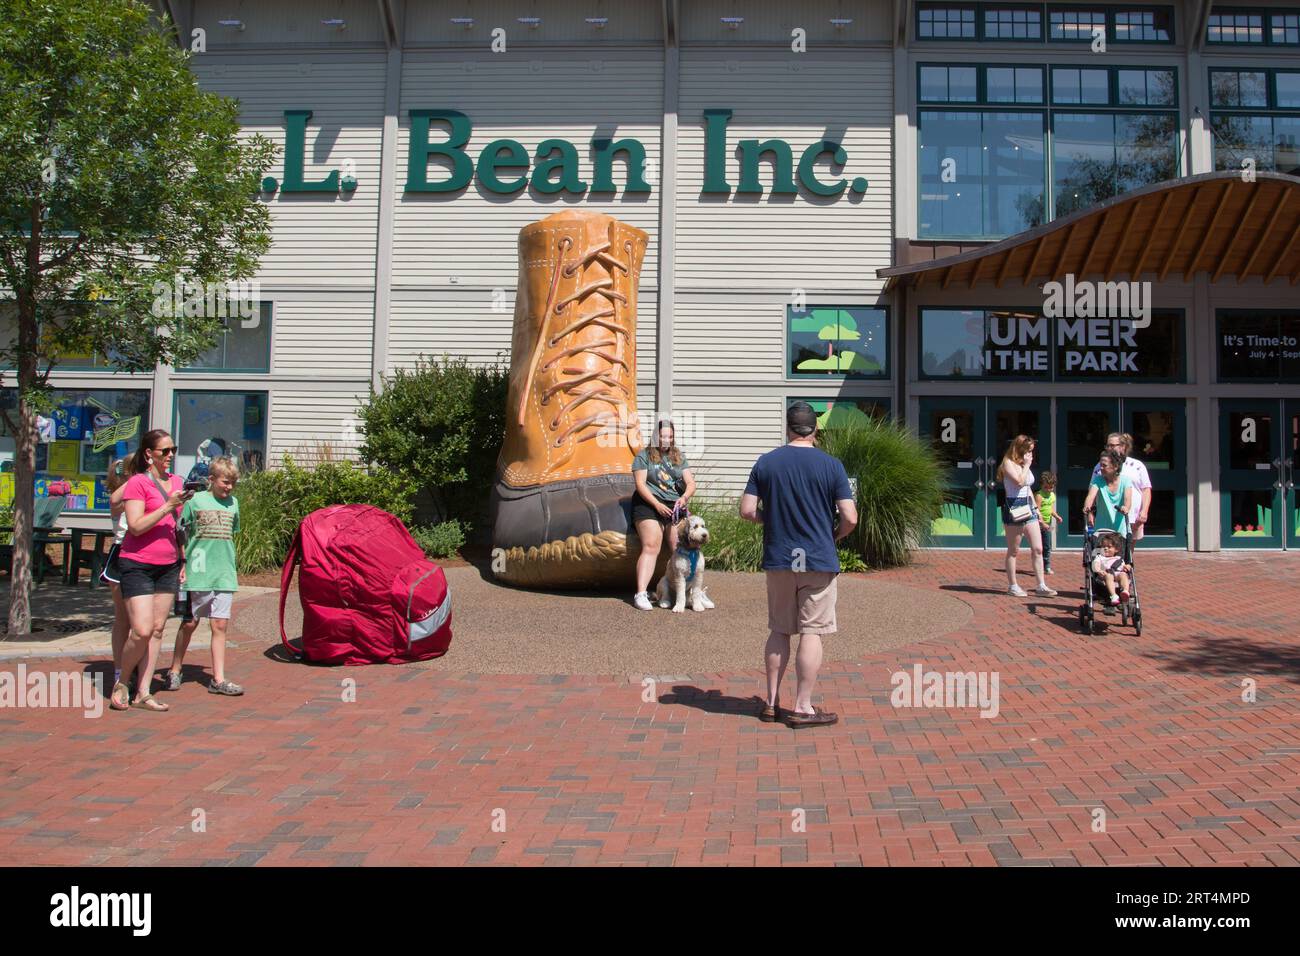 Tourists and shoppers pose with the duck boot outside of the LL Bean Retail Store, Freeport, Maine, USA Stock Photo